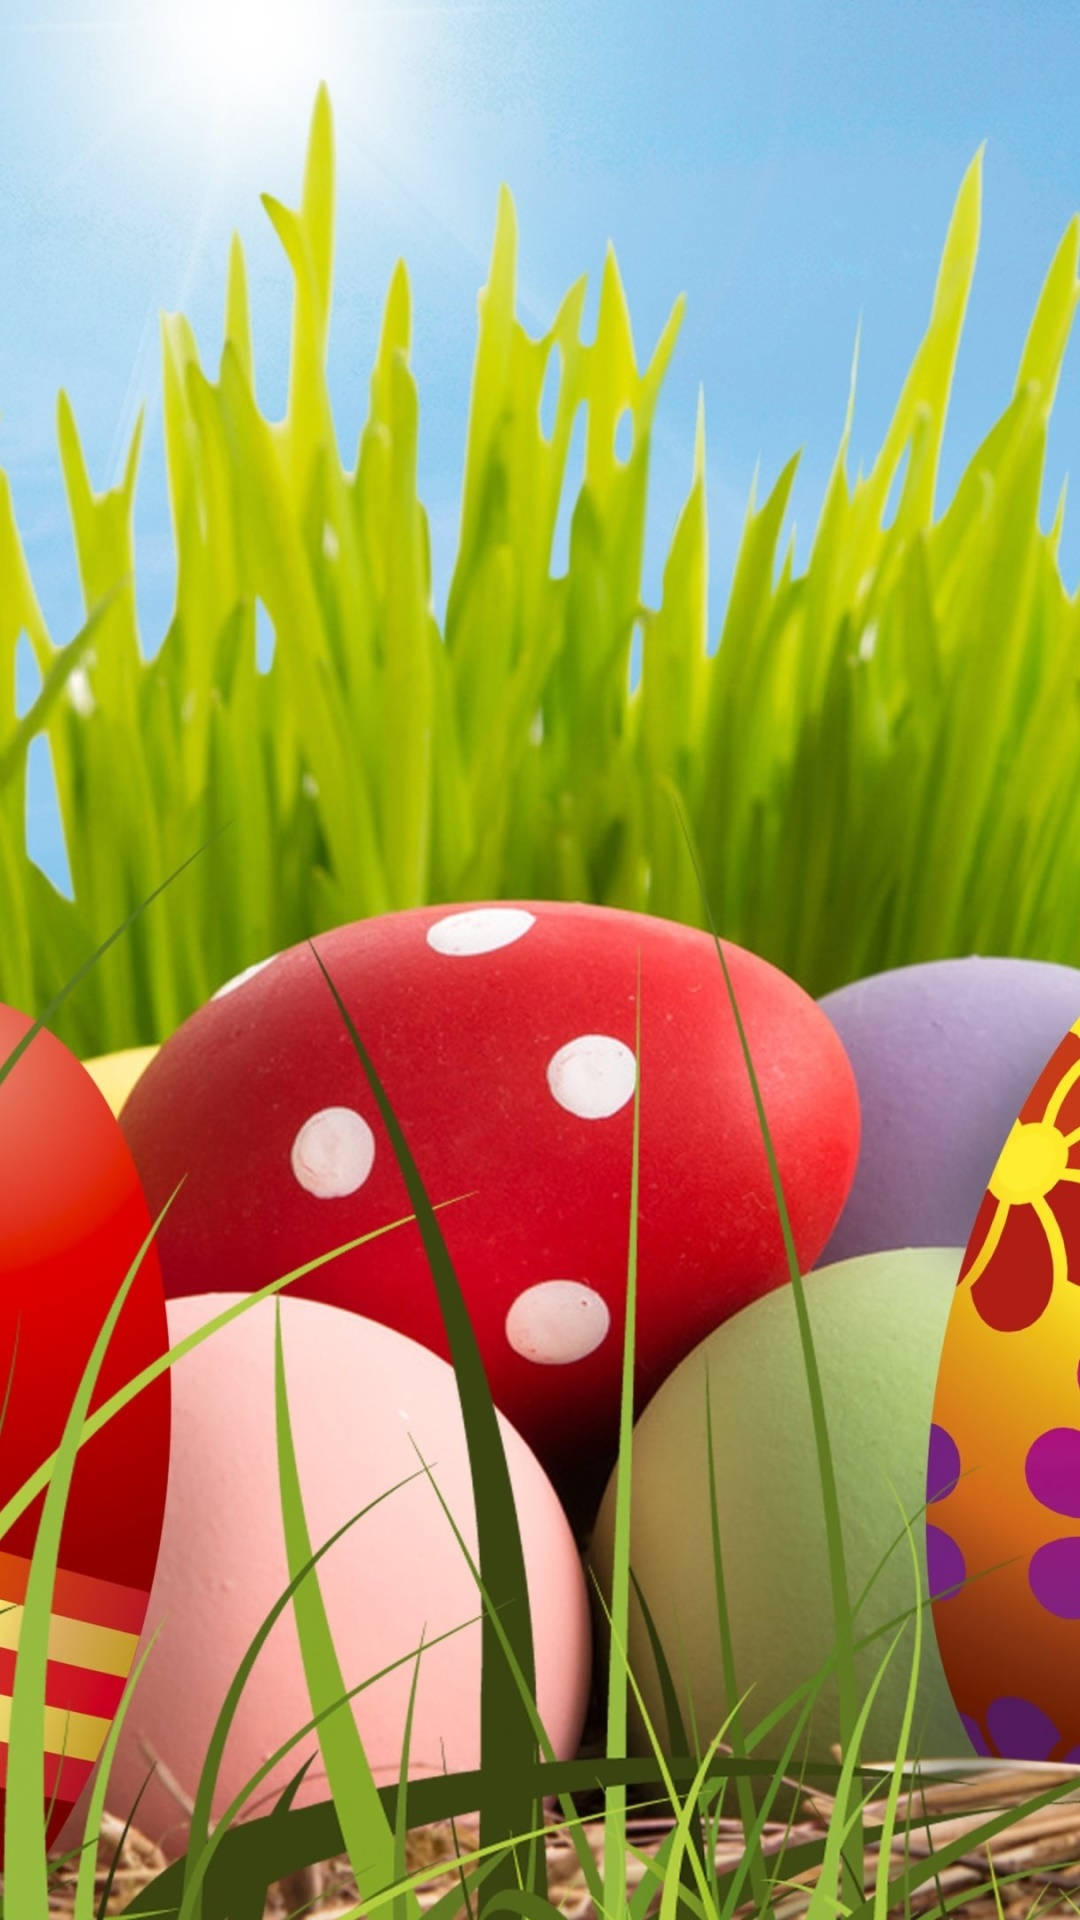 Spread the cheerful spirit of Easter with the Easter Phone! Wallpaper